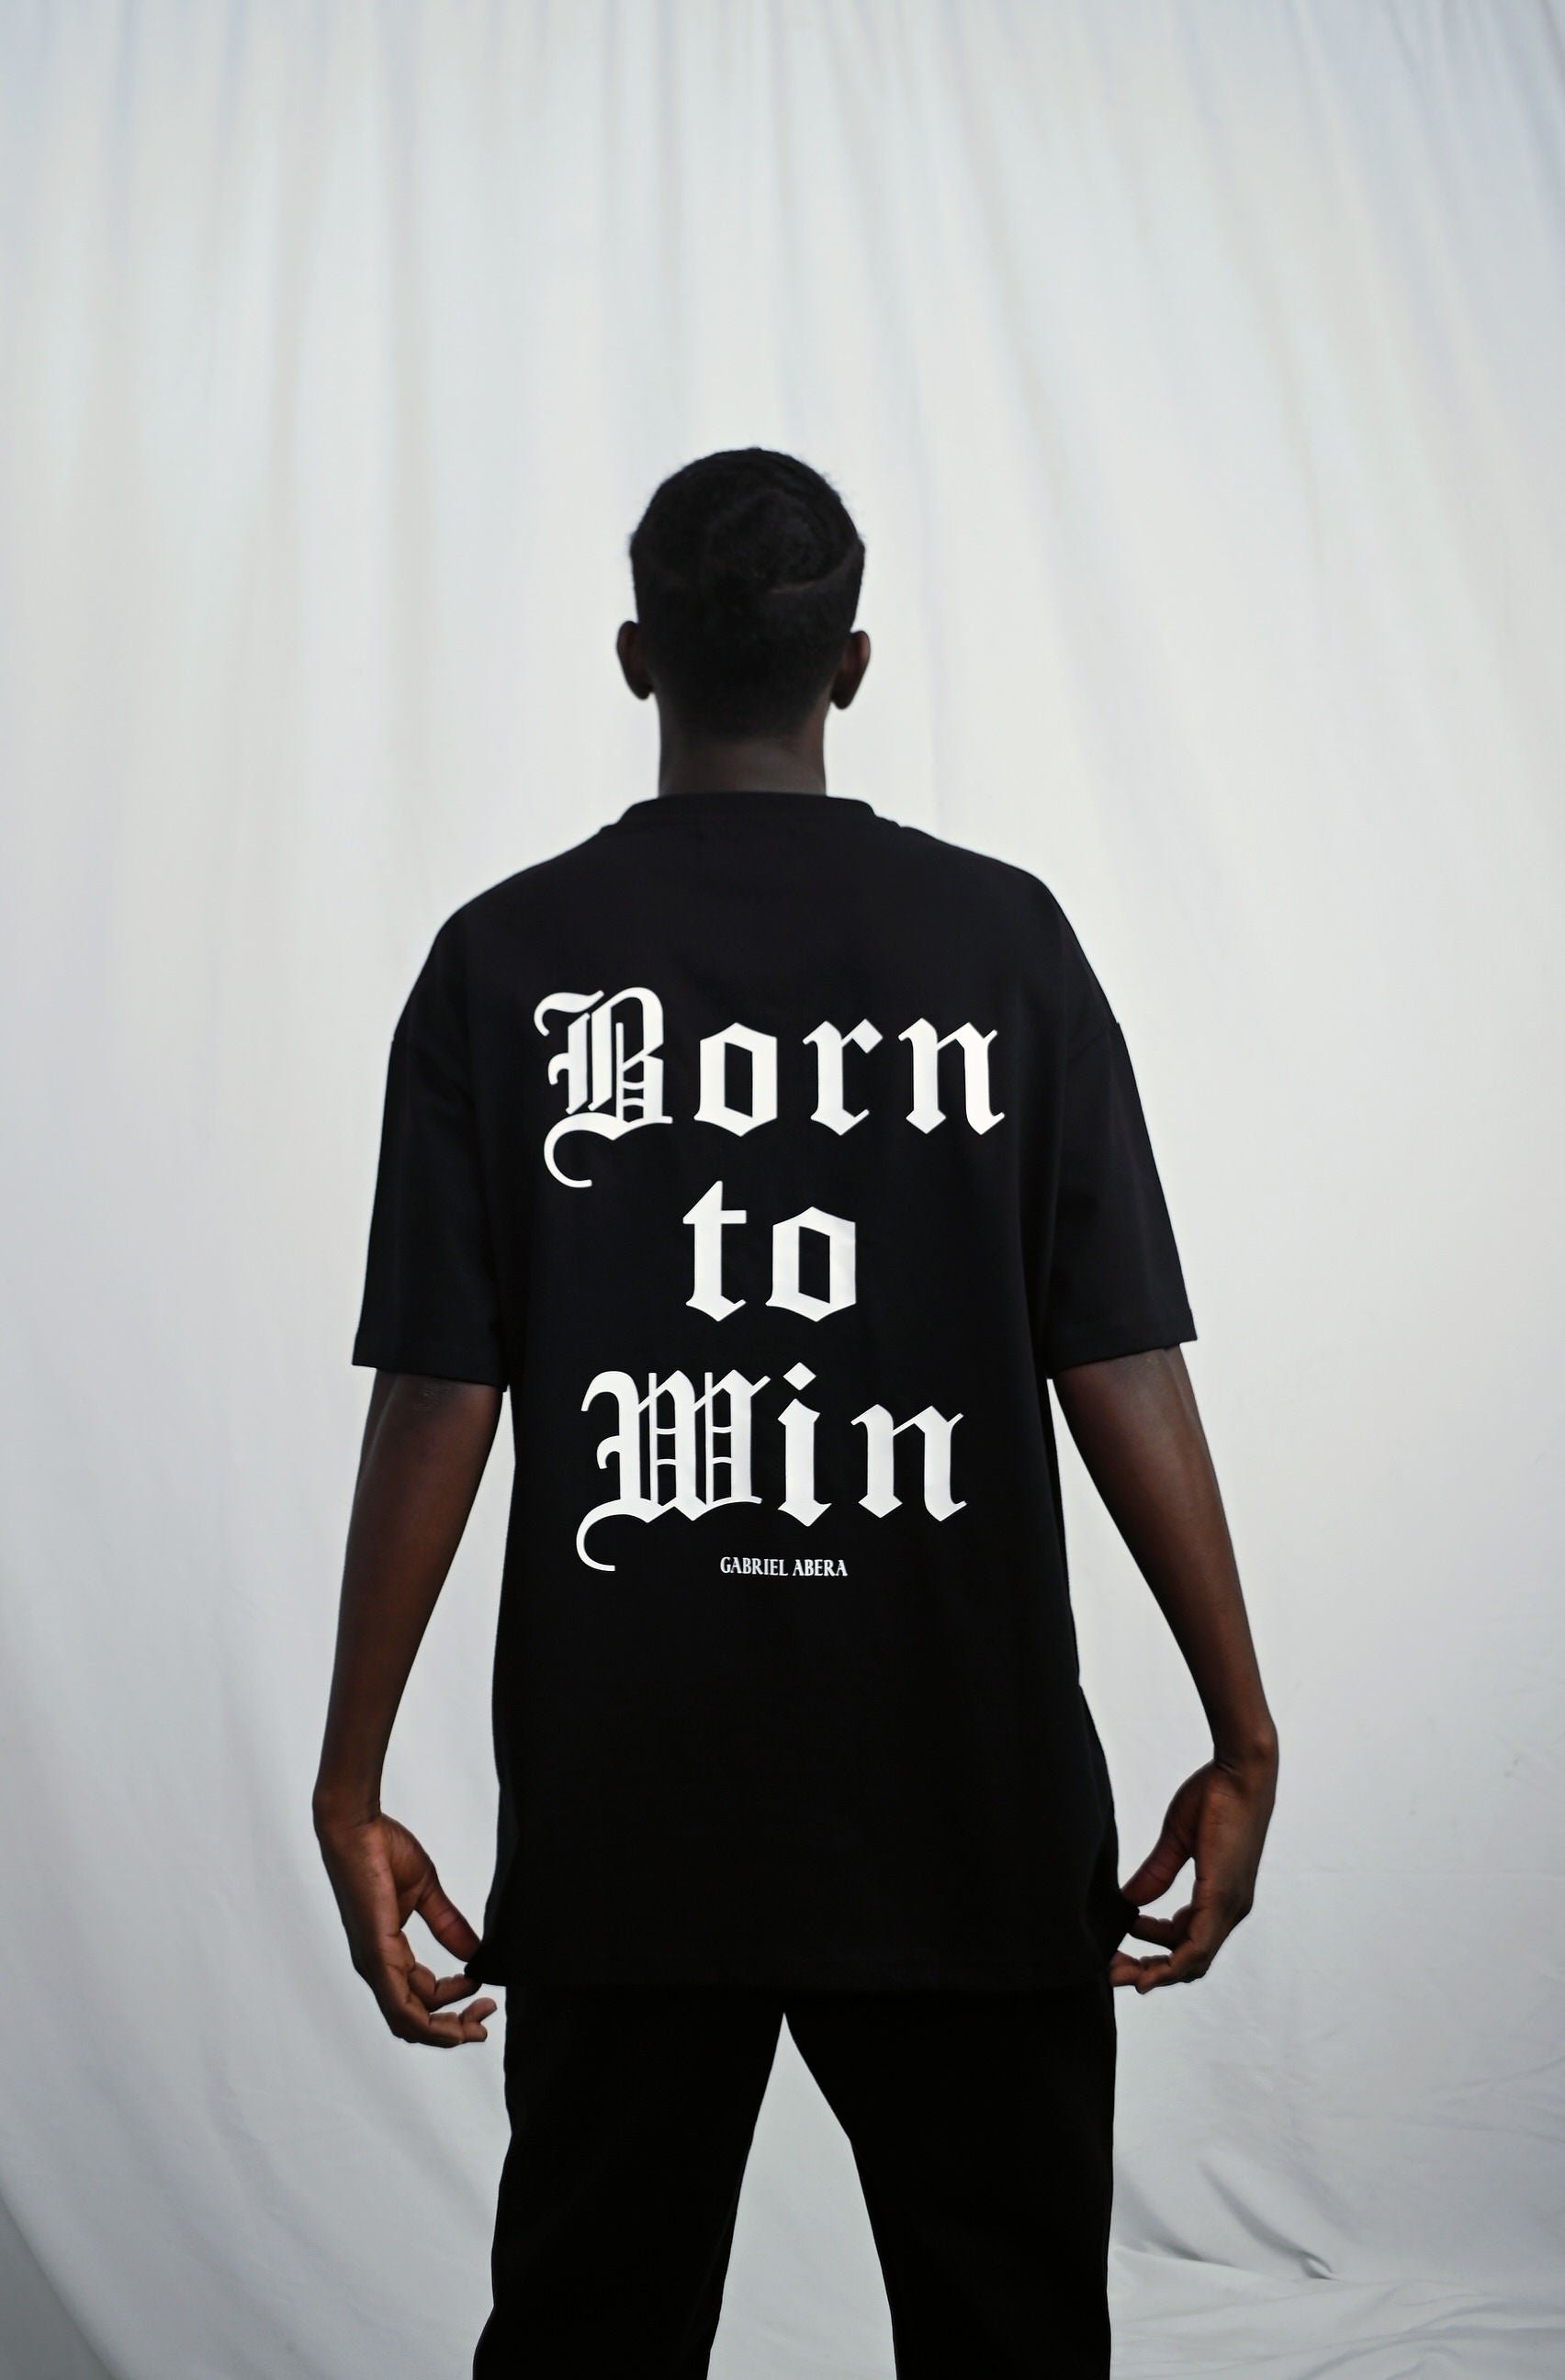 Male model wearing s Black oversize Tshirt with born to win design on the back